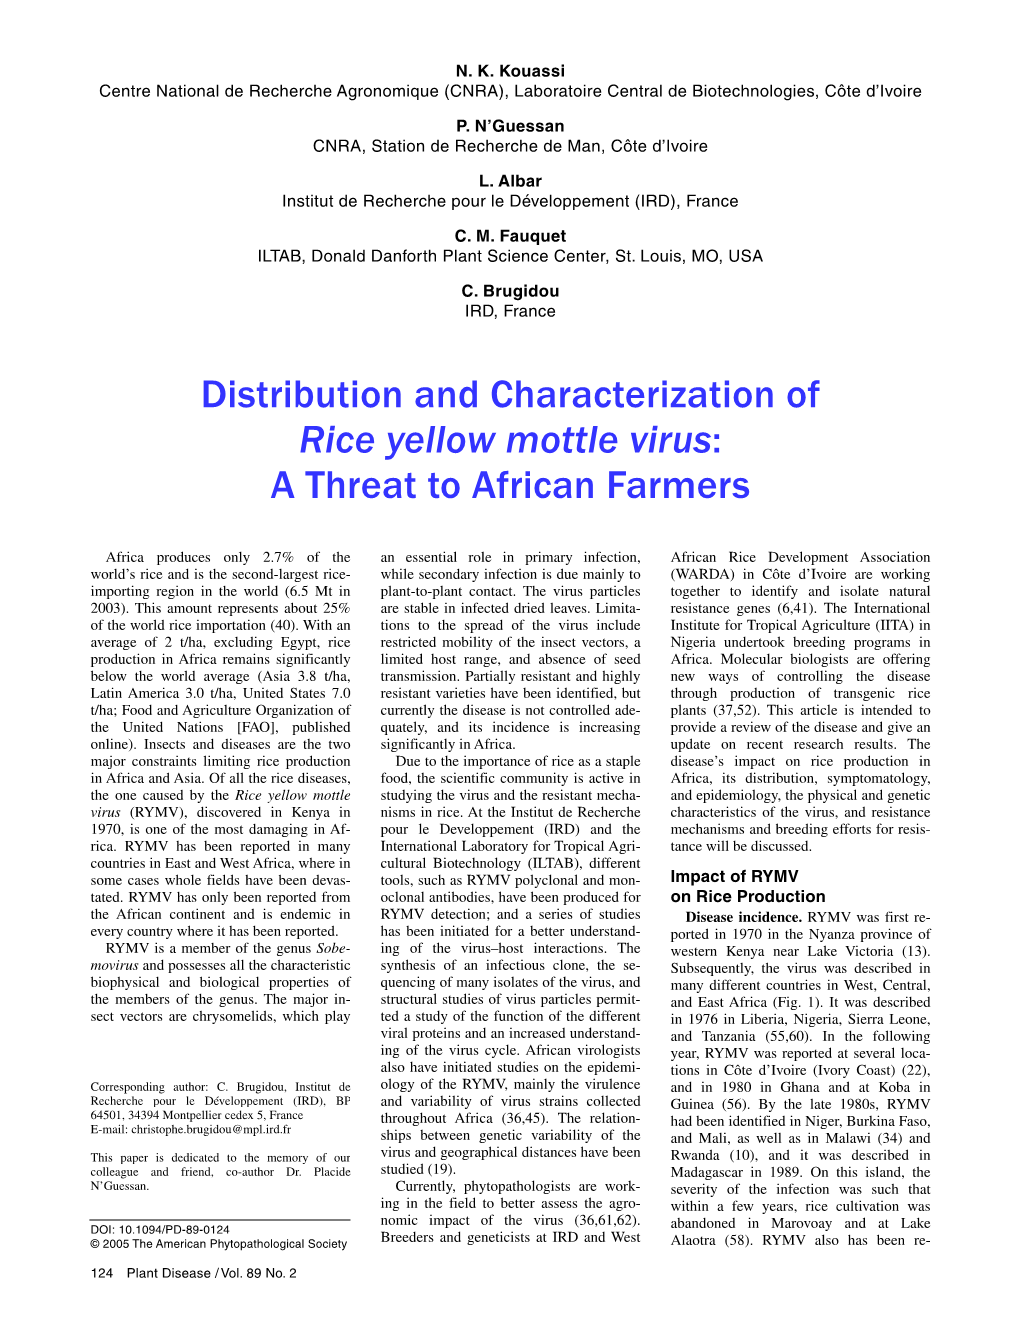 Distribution and Characterization of Rice Yellow Mottle Virus: a Threat to African Farmers